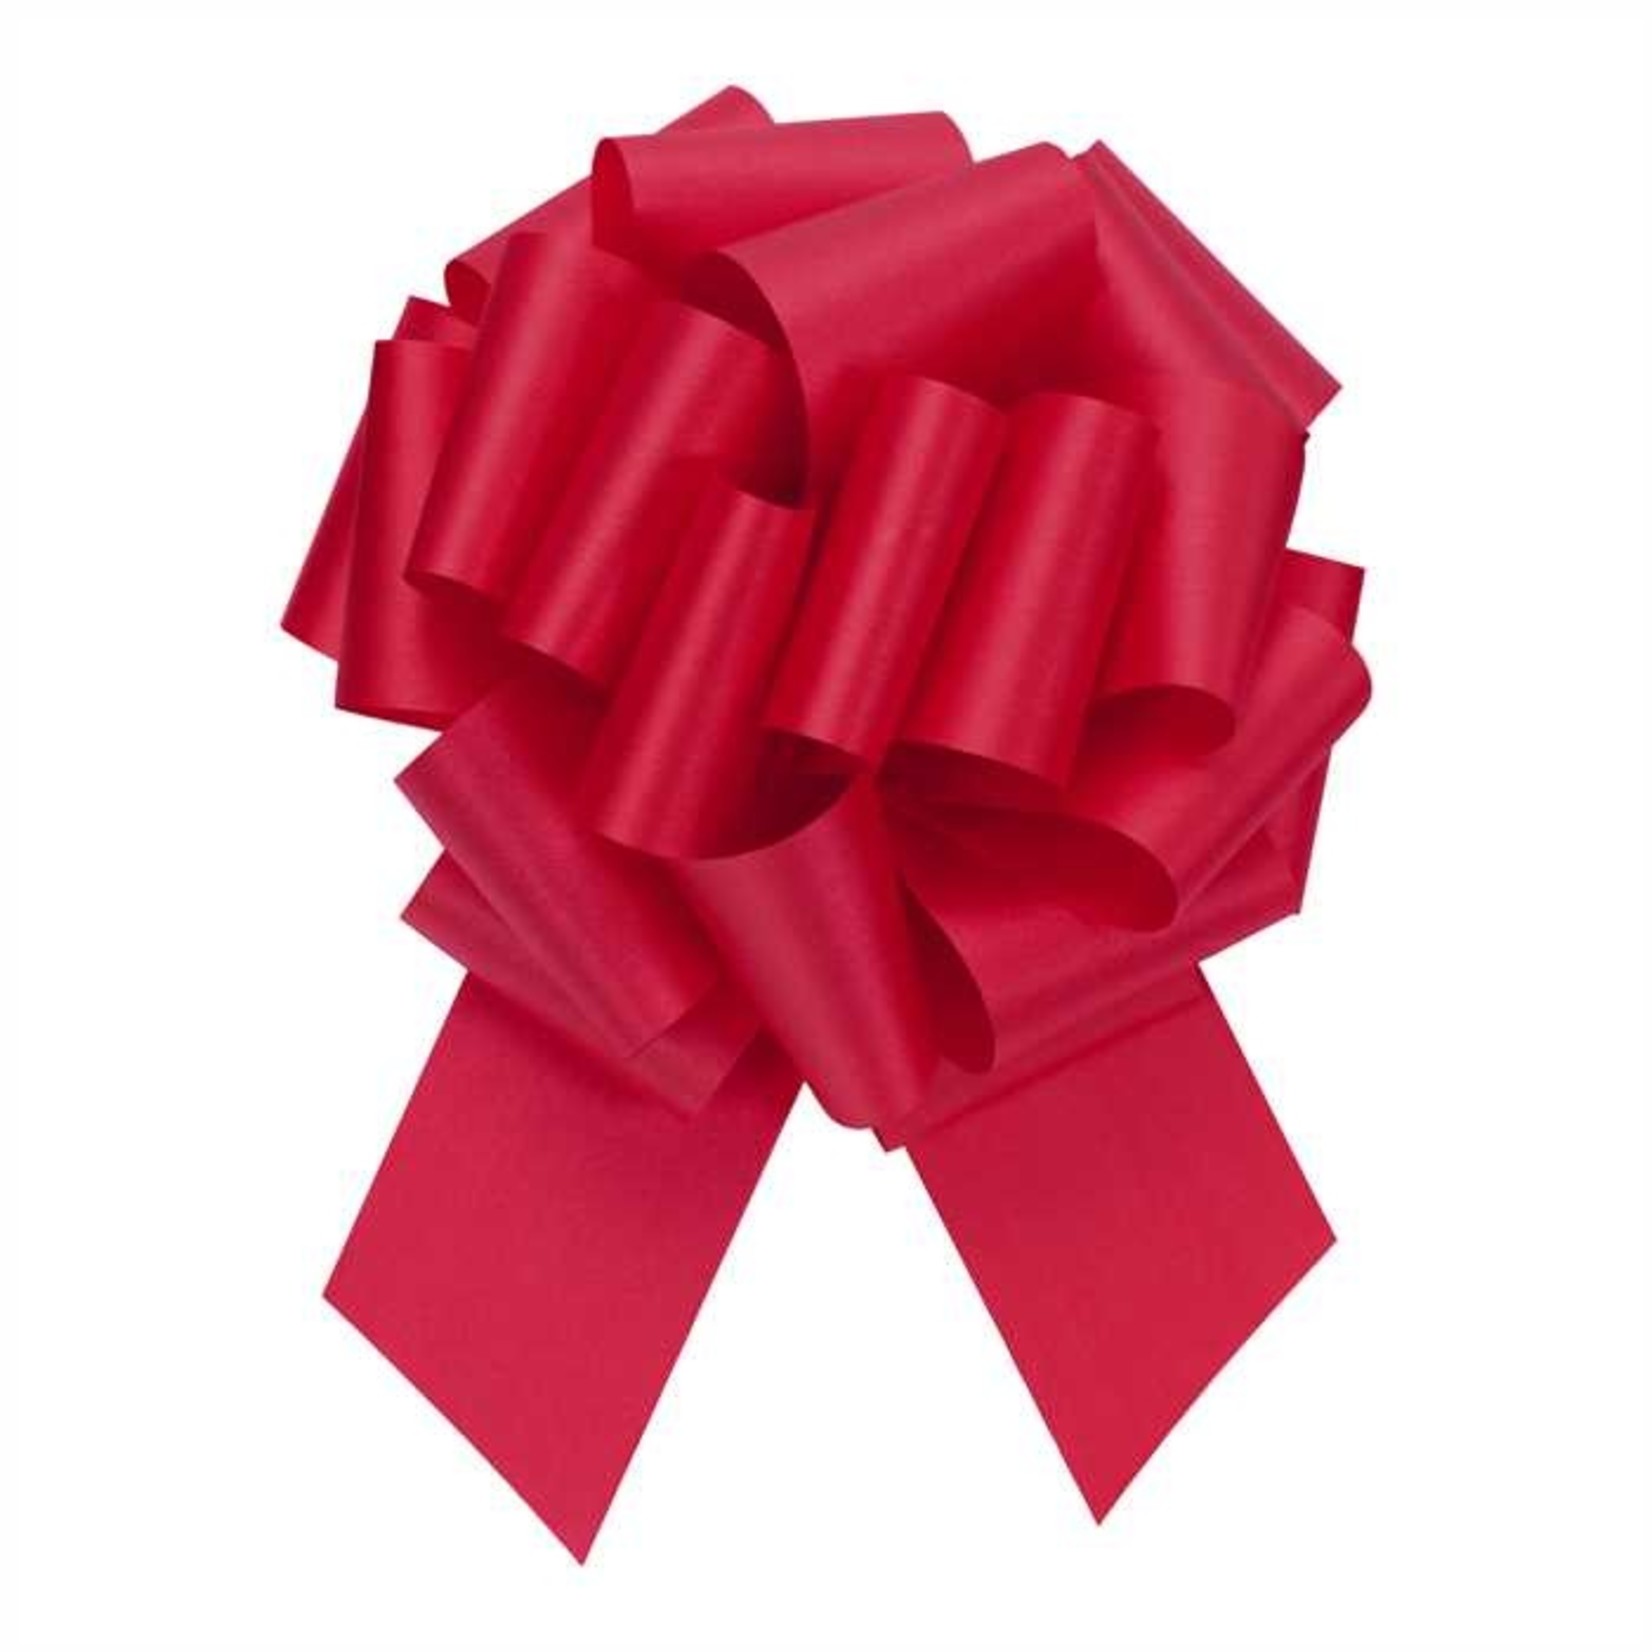 PERFECT BOW  #5 IMPERIAL RED, 7/8” ribbon width, 4" bow size, 18 loops